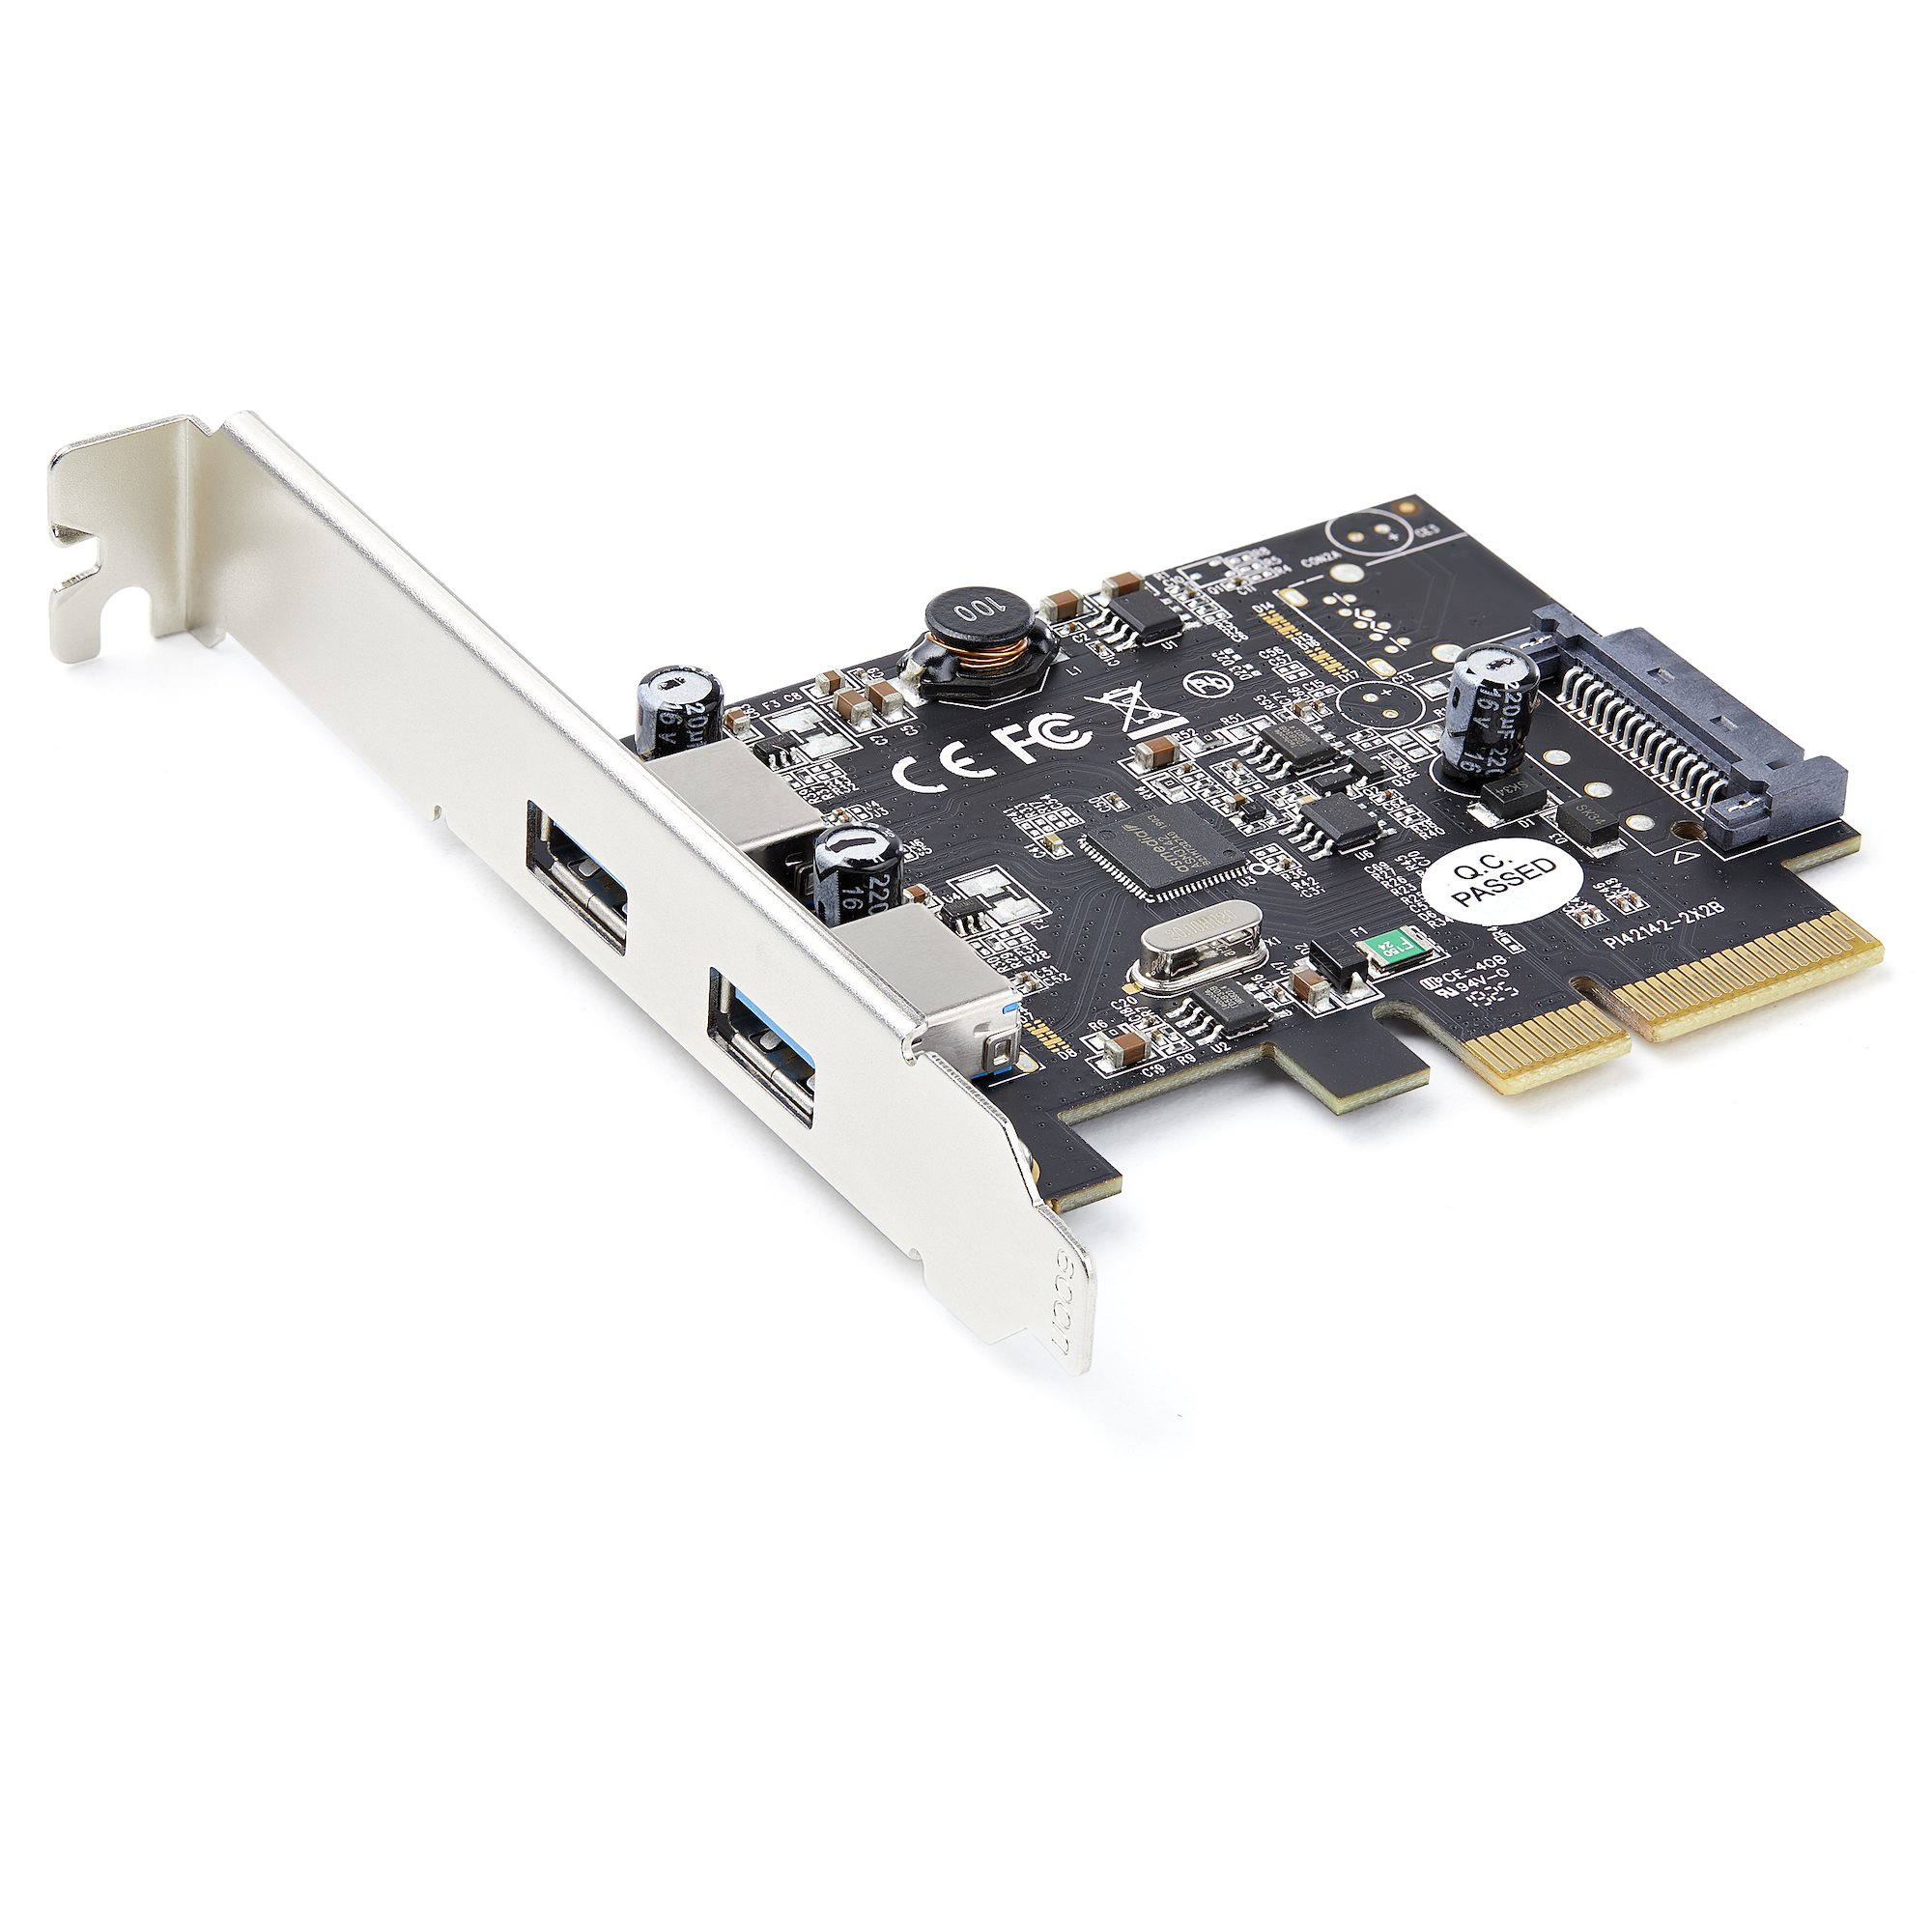 StarTech.com 2-Port USB PCIe Card with 10Gbps/port - USB 3.1/3.2 Gen 2 Type-A PCI Express 3.0 x2 Host Controller Expansion Card - Add-On Adapter Card - Full/Low Profile - Windows & Linux